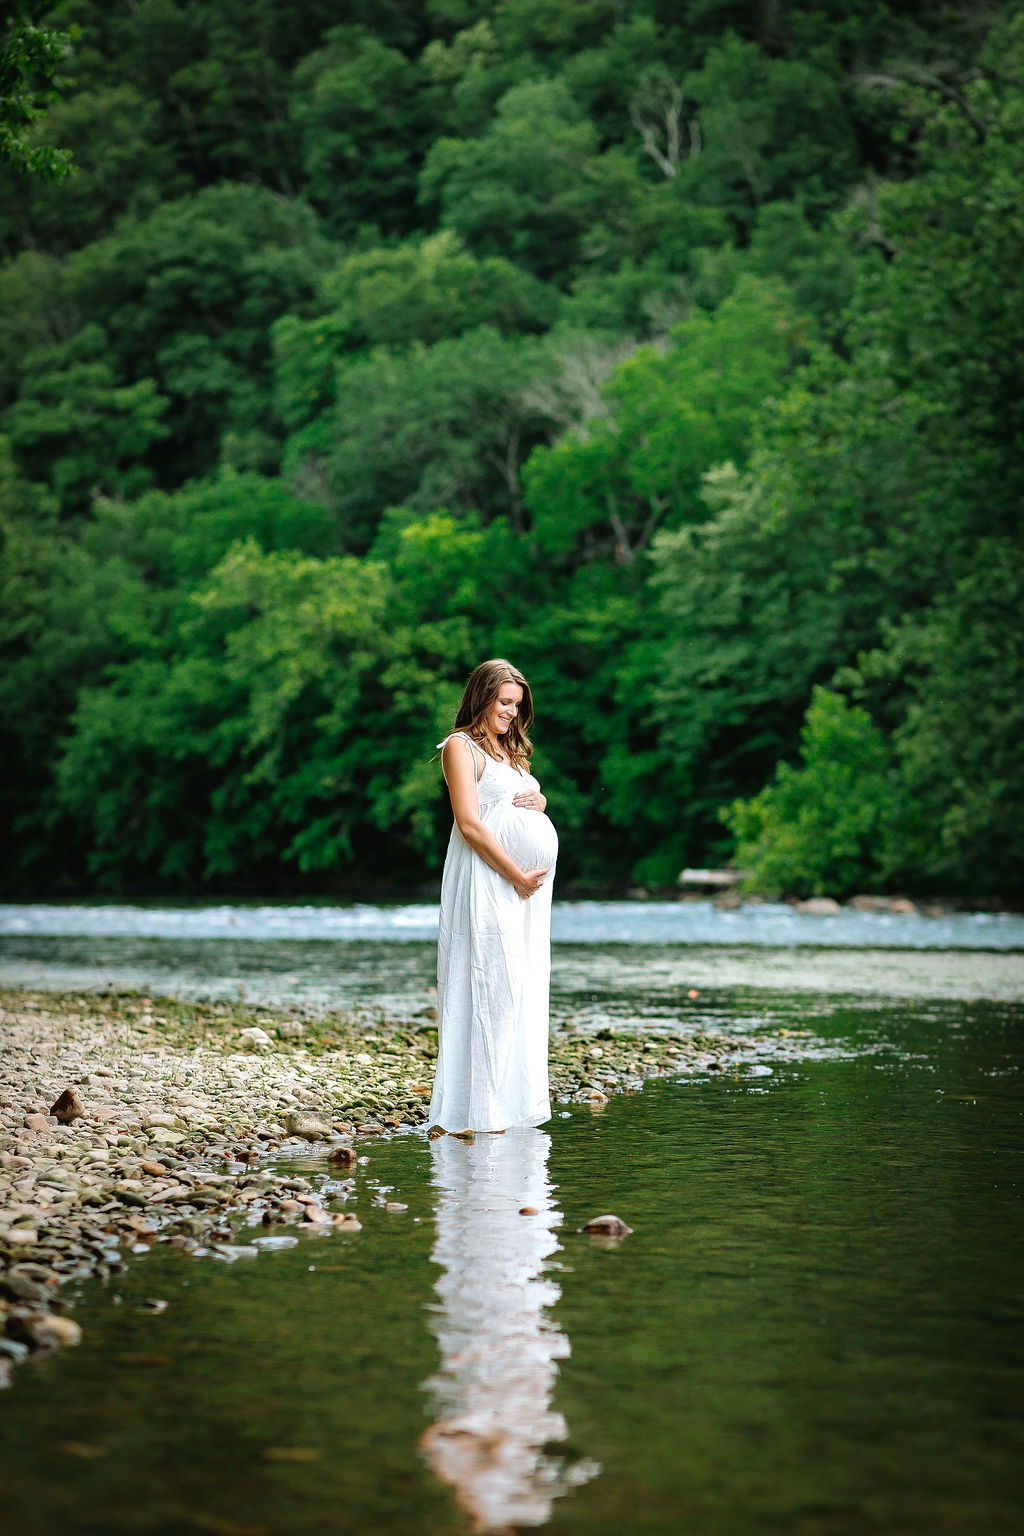 A mother to be stands on a river's edge looking down at her bump in a long white maternity dress jefferson obgyn